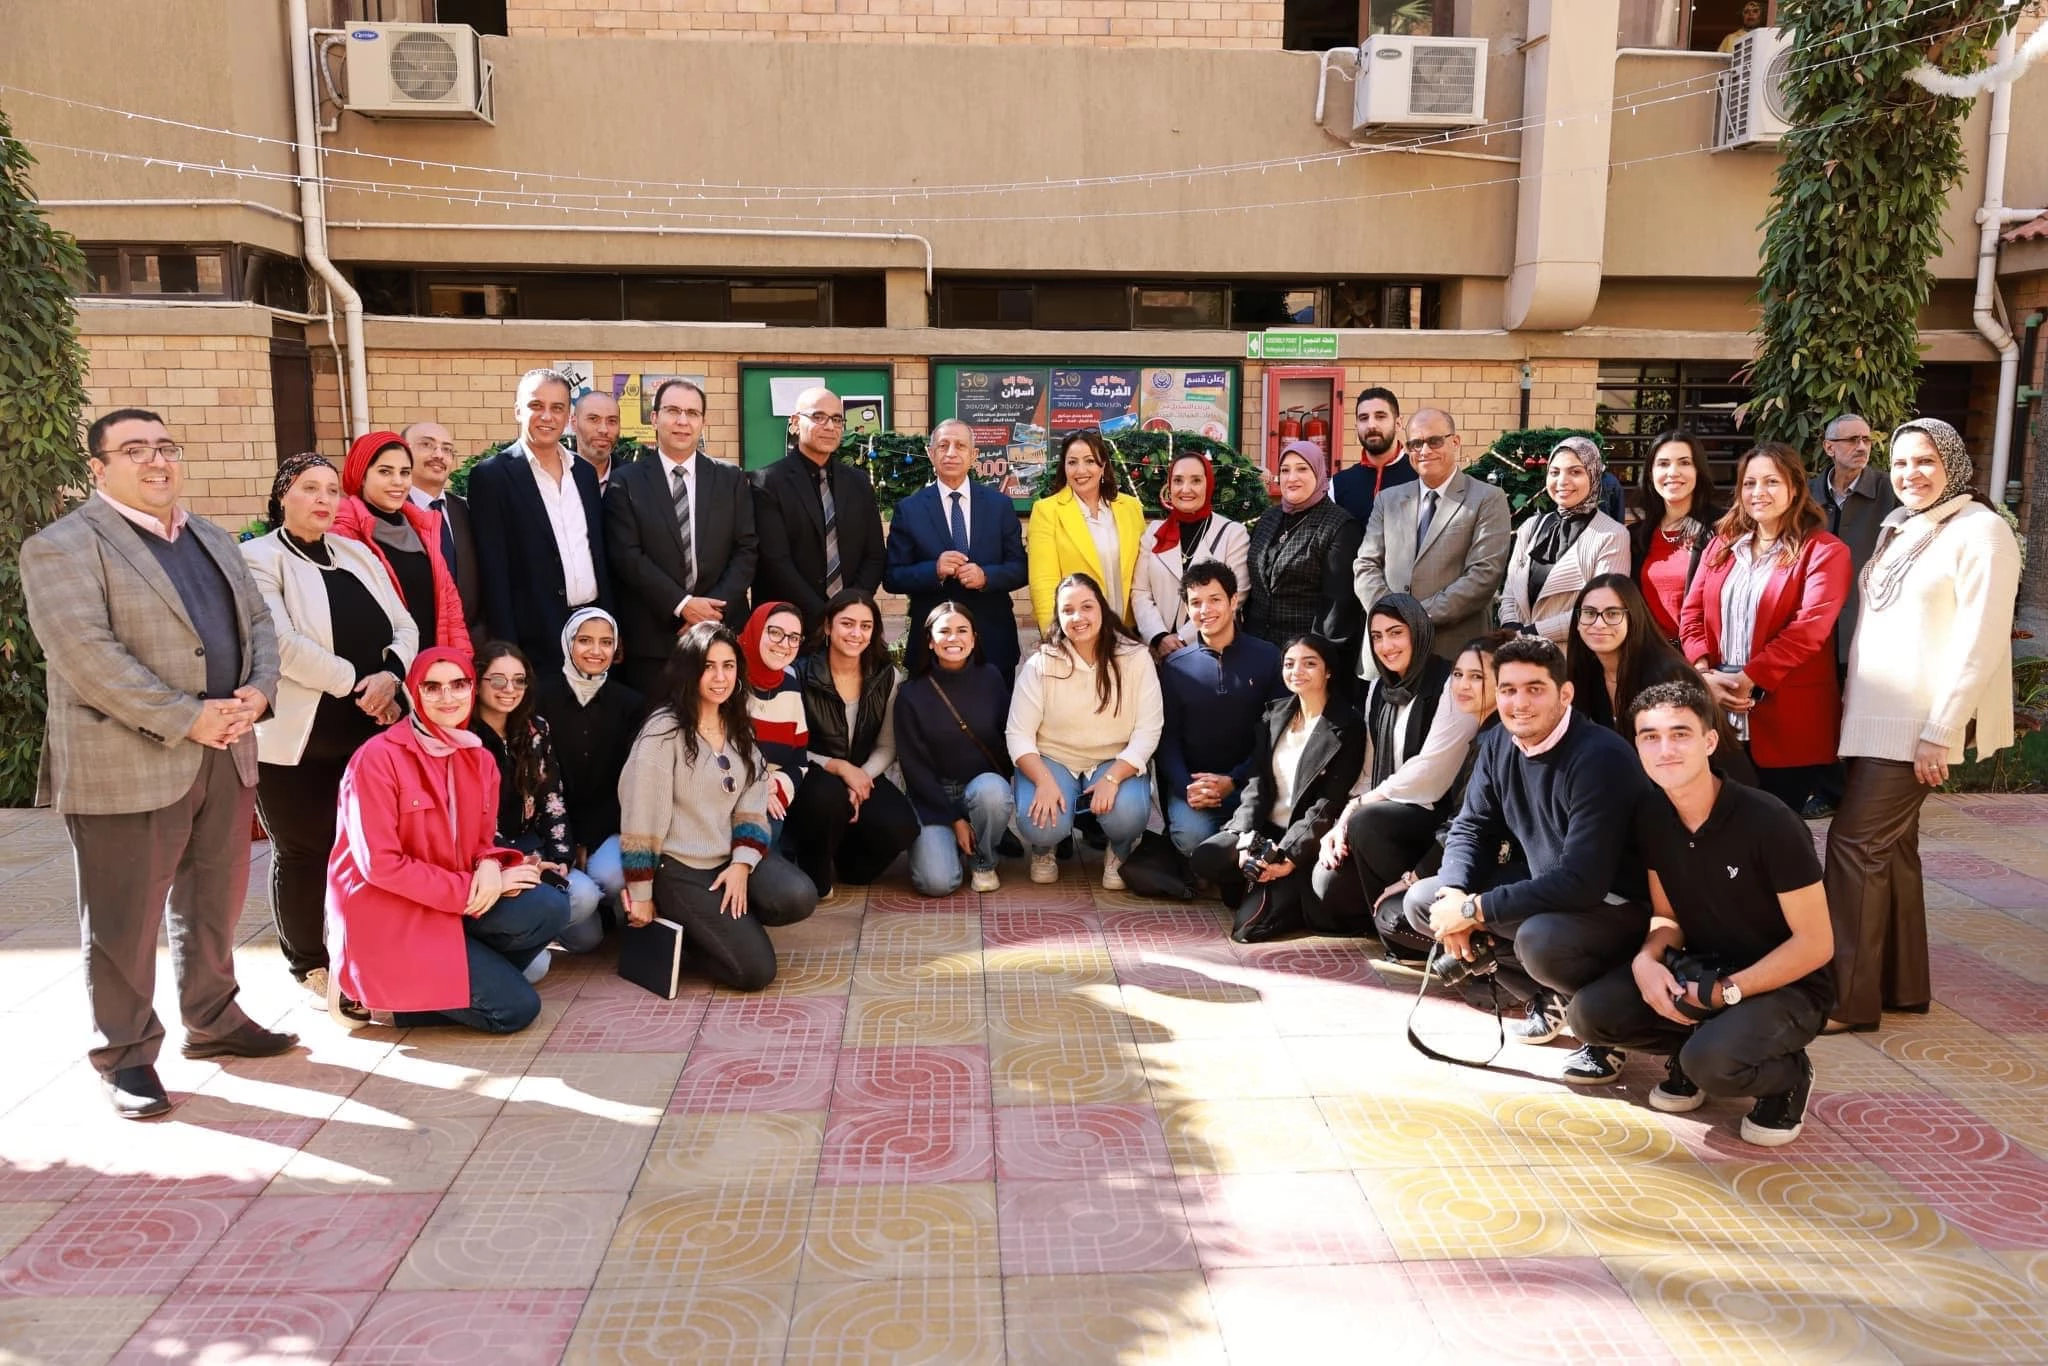 His Excellency Professor Dr., President of the Arab Academy for Science, Technology and Maritime Transport, opened the closing ceremony of activities and the exhibition of fine arts and handicrafts for students of the Faculties of Management, Technology, Language and Media in Miami on: 1/4/20248